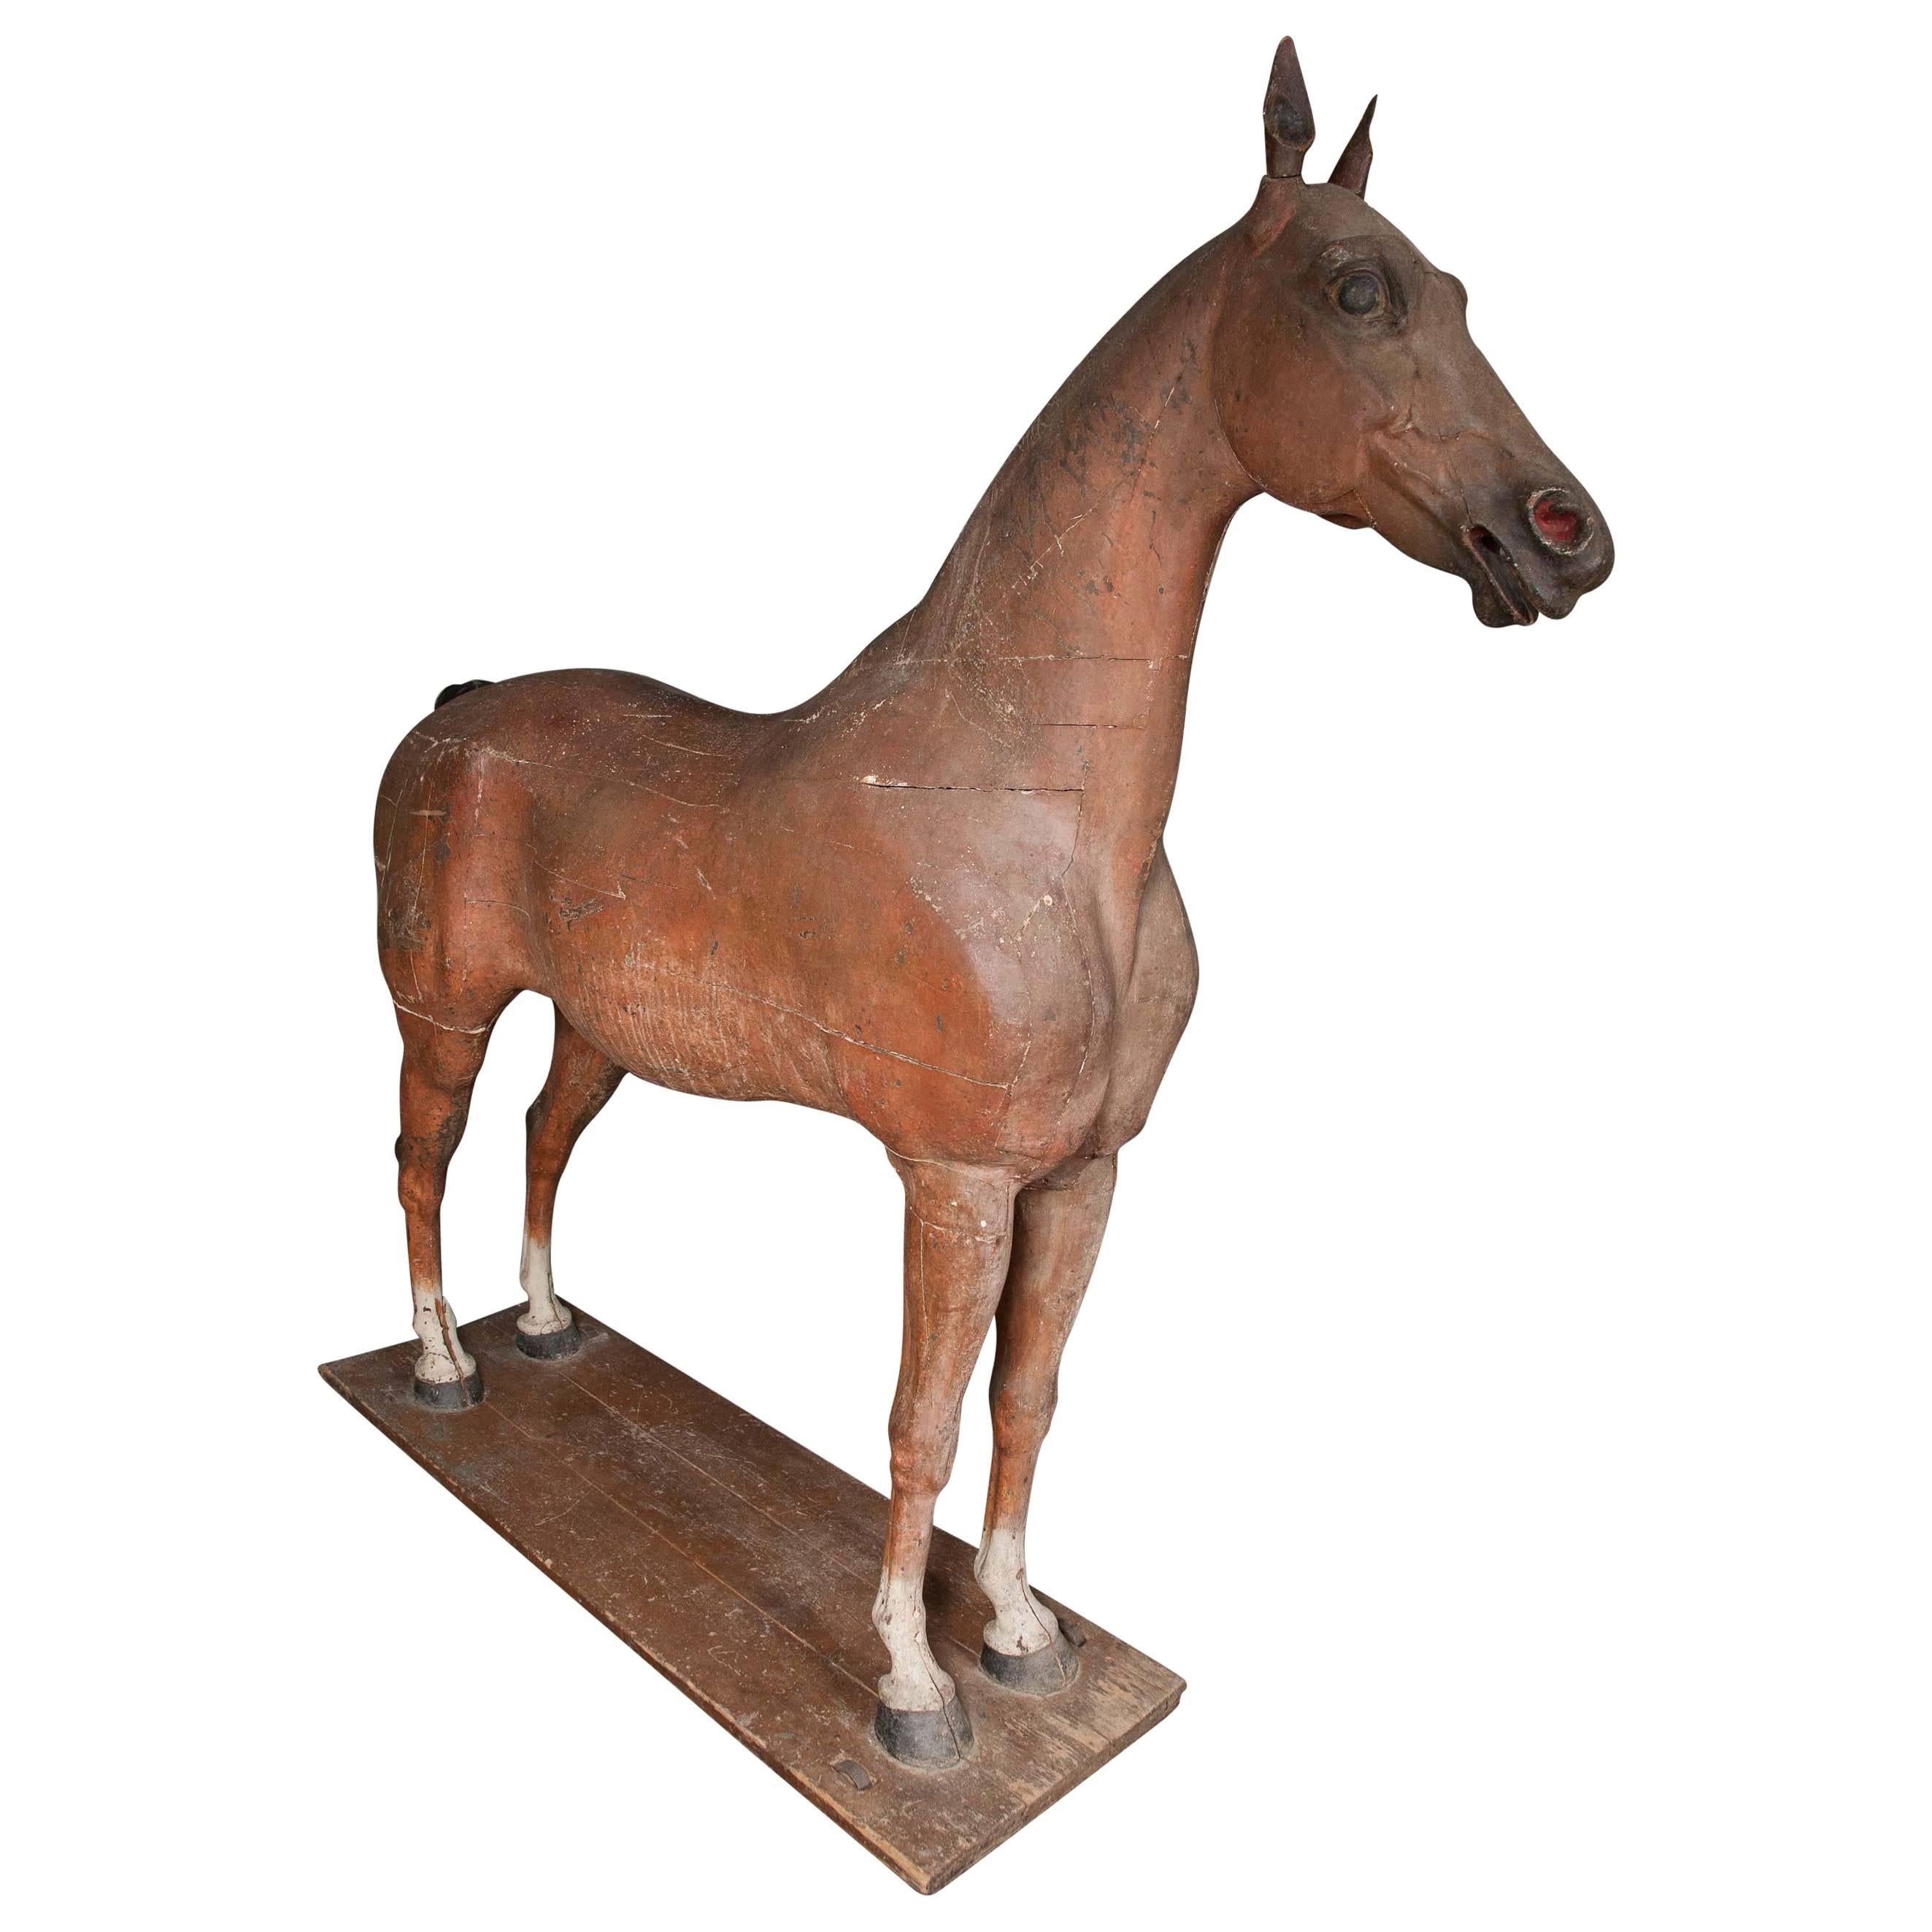 Late 18th-Early 19th Century, Full Size Wooden Sculpture of a Horse For Sale